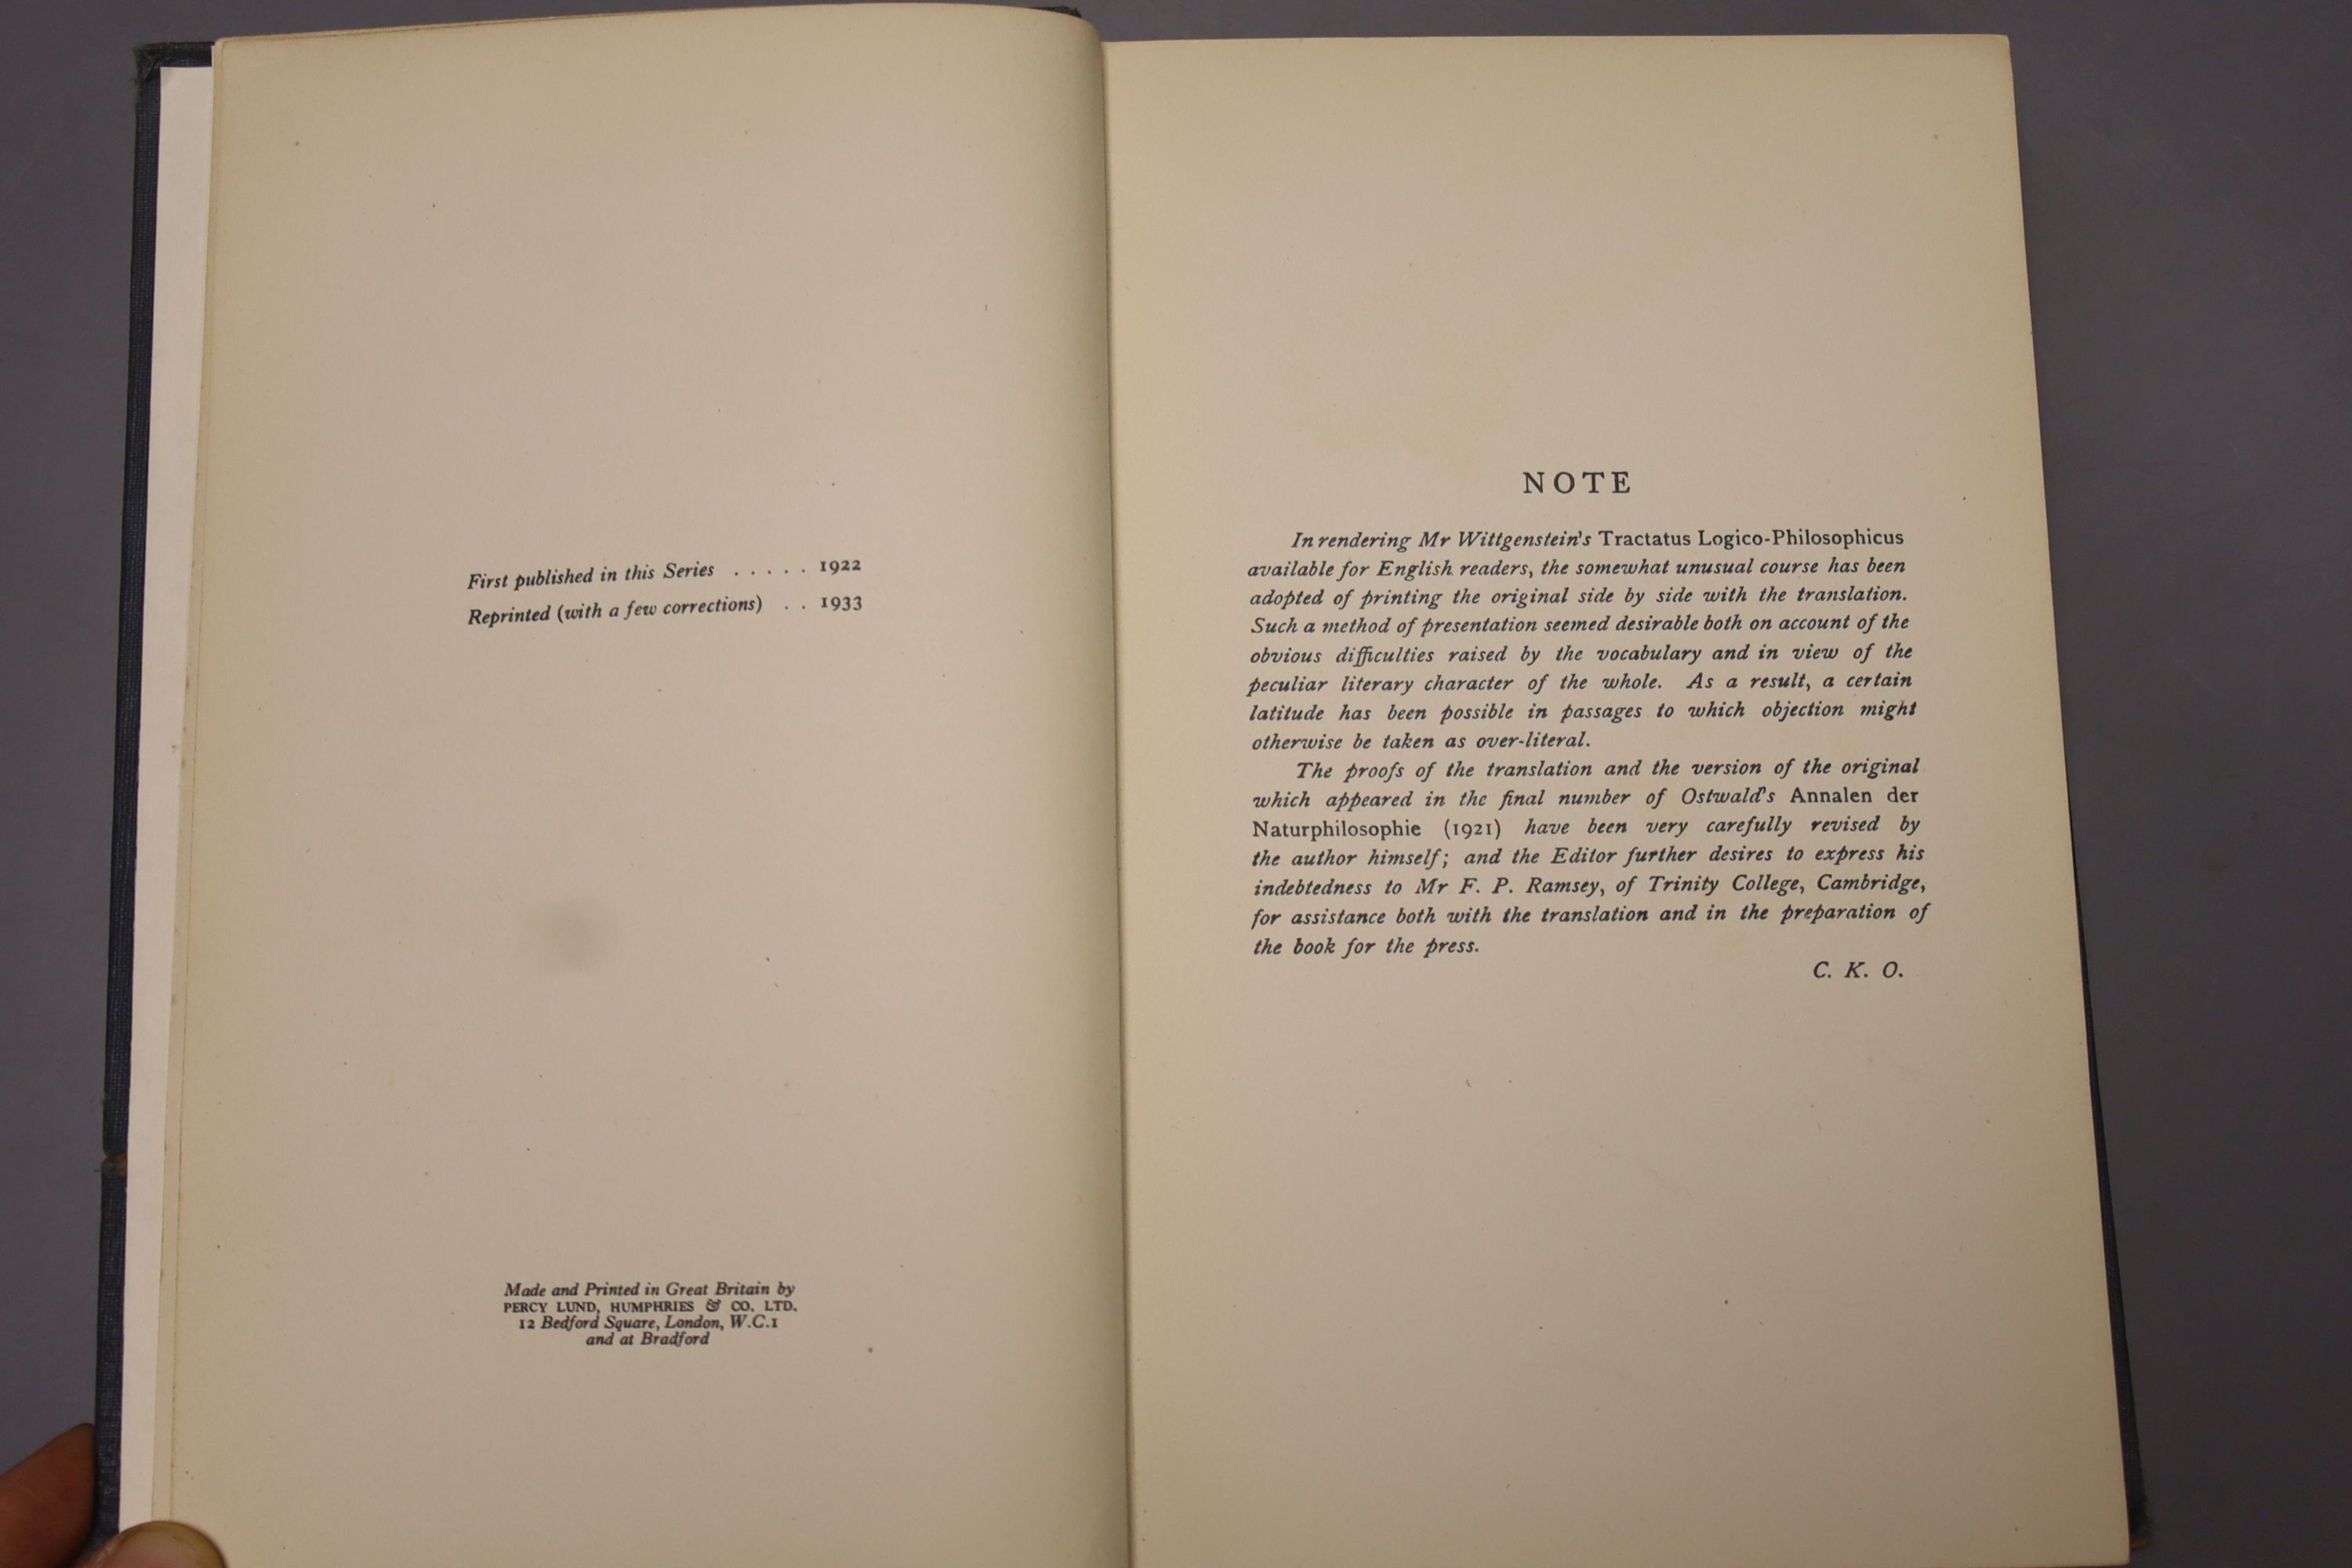 Wittgenstein, Ludwig – Tractatus Logico-Philosophicus, with an introduction by Bertrand Russell. gilt-lettered cloth, reprinted with a few corrections, 1933